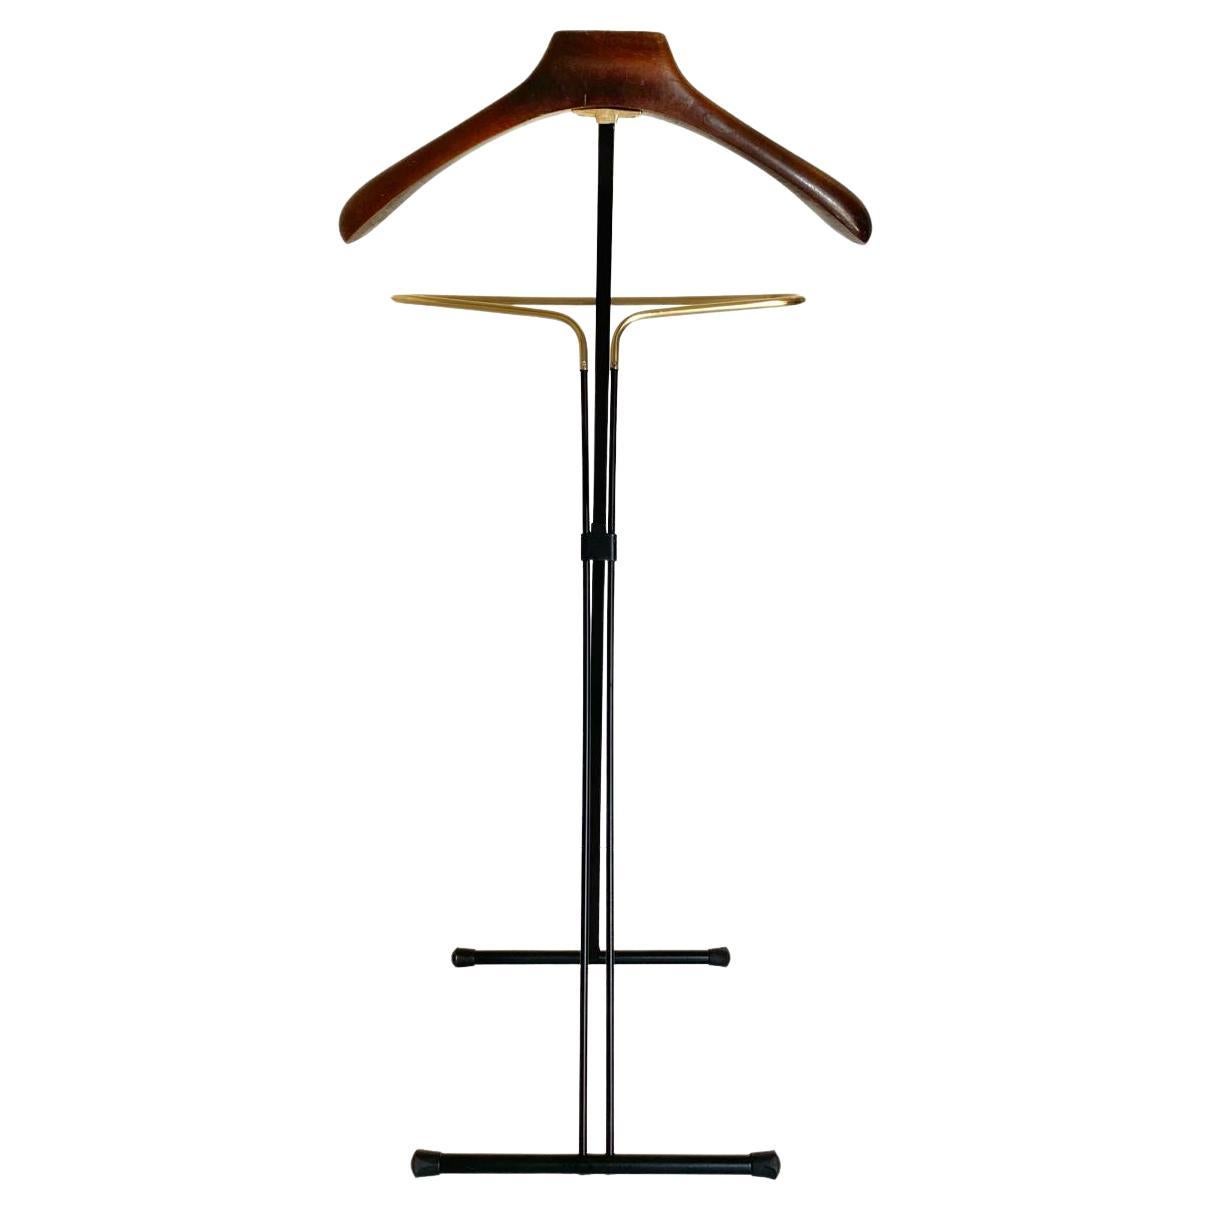 Charmy vintage valt stand manufactured in Italy in the 1950s by iconic Fratelli Reguitti company.  Folding valet with beech wood hanger and refined iron and brass frame. Completely restored as follows:
Iron has been repainted by using its original